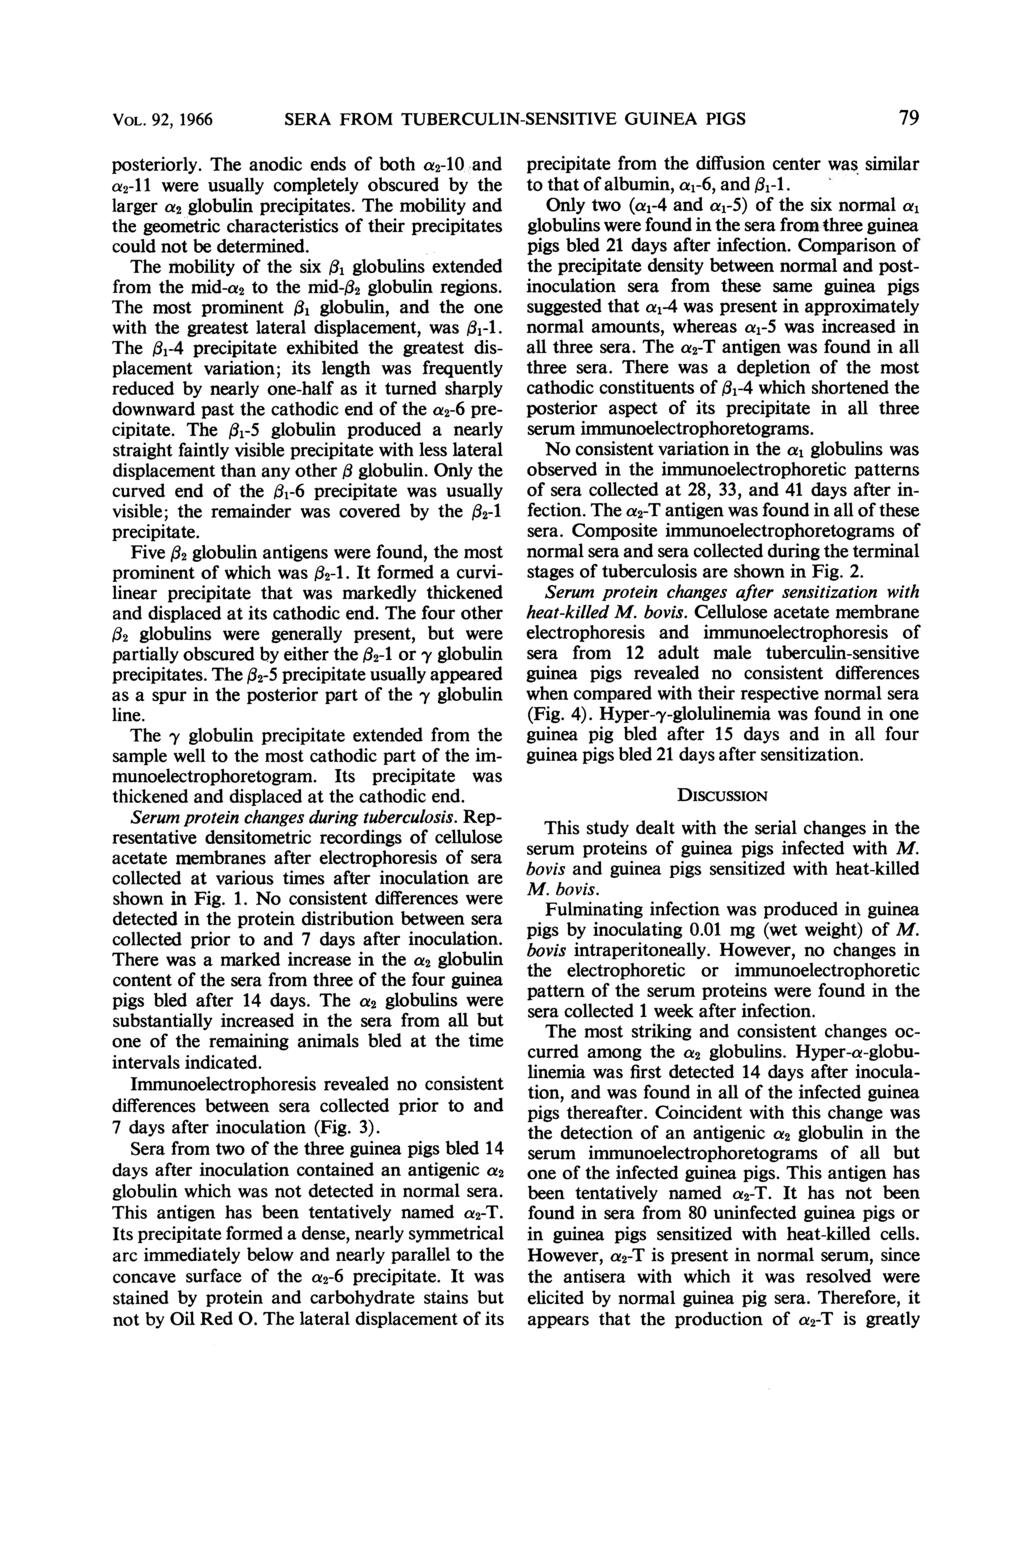 VOL. 92, 1966 SERA FROM TUBERCULIN-SENSITIVE GUINEA PIGS 79 posteriorly. The anodic ends of both a2-10 and a2-1 1 were usually completely obscured by the larger a2 globulin precipitates.